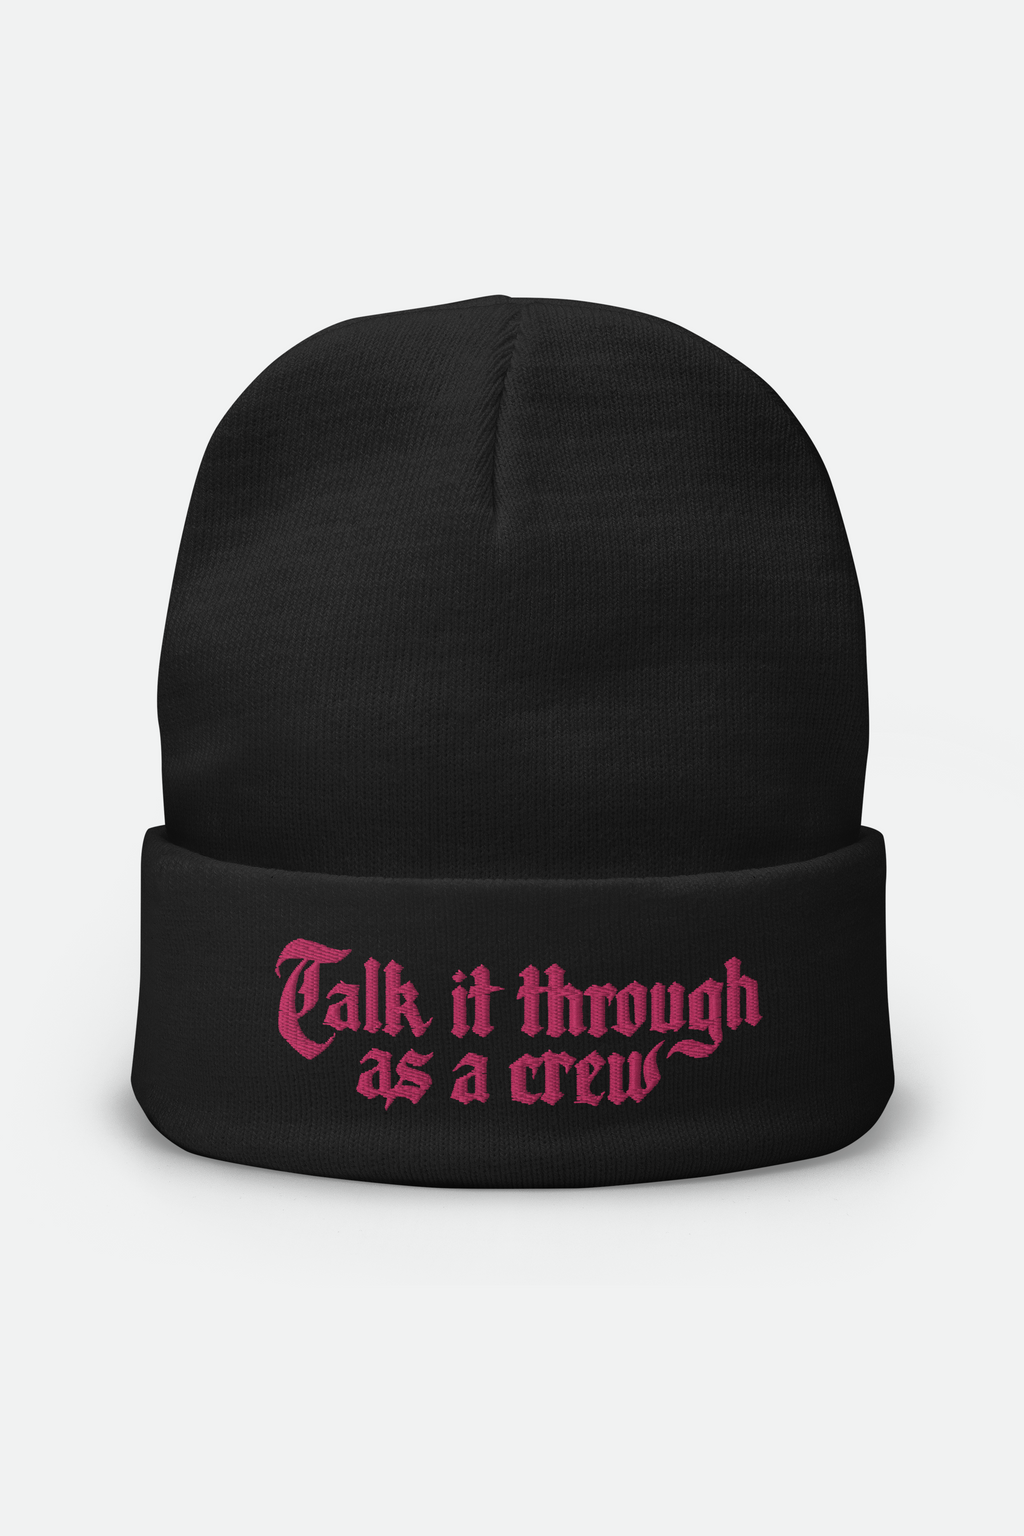 As a Crew Beanie | OFMD